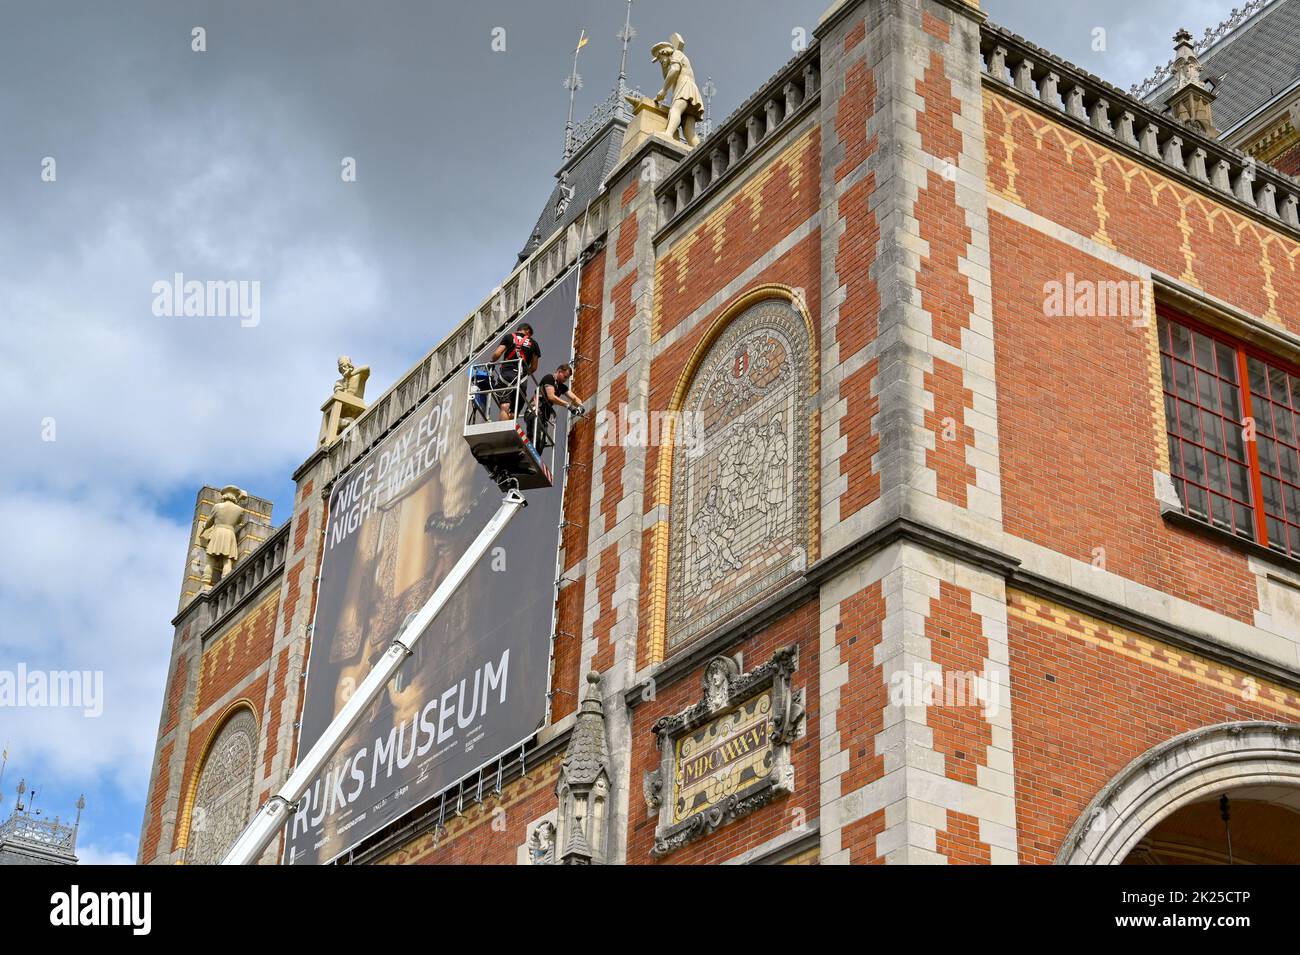 Amsterdam, Netherlands - August 2022: People standing on a cherry picker platform fixing a large banner to the outside wall of the famous Rijks Museum Stock Photo